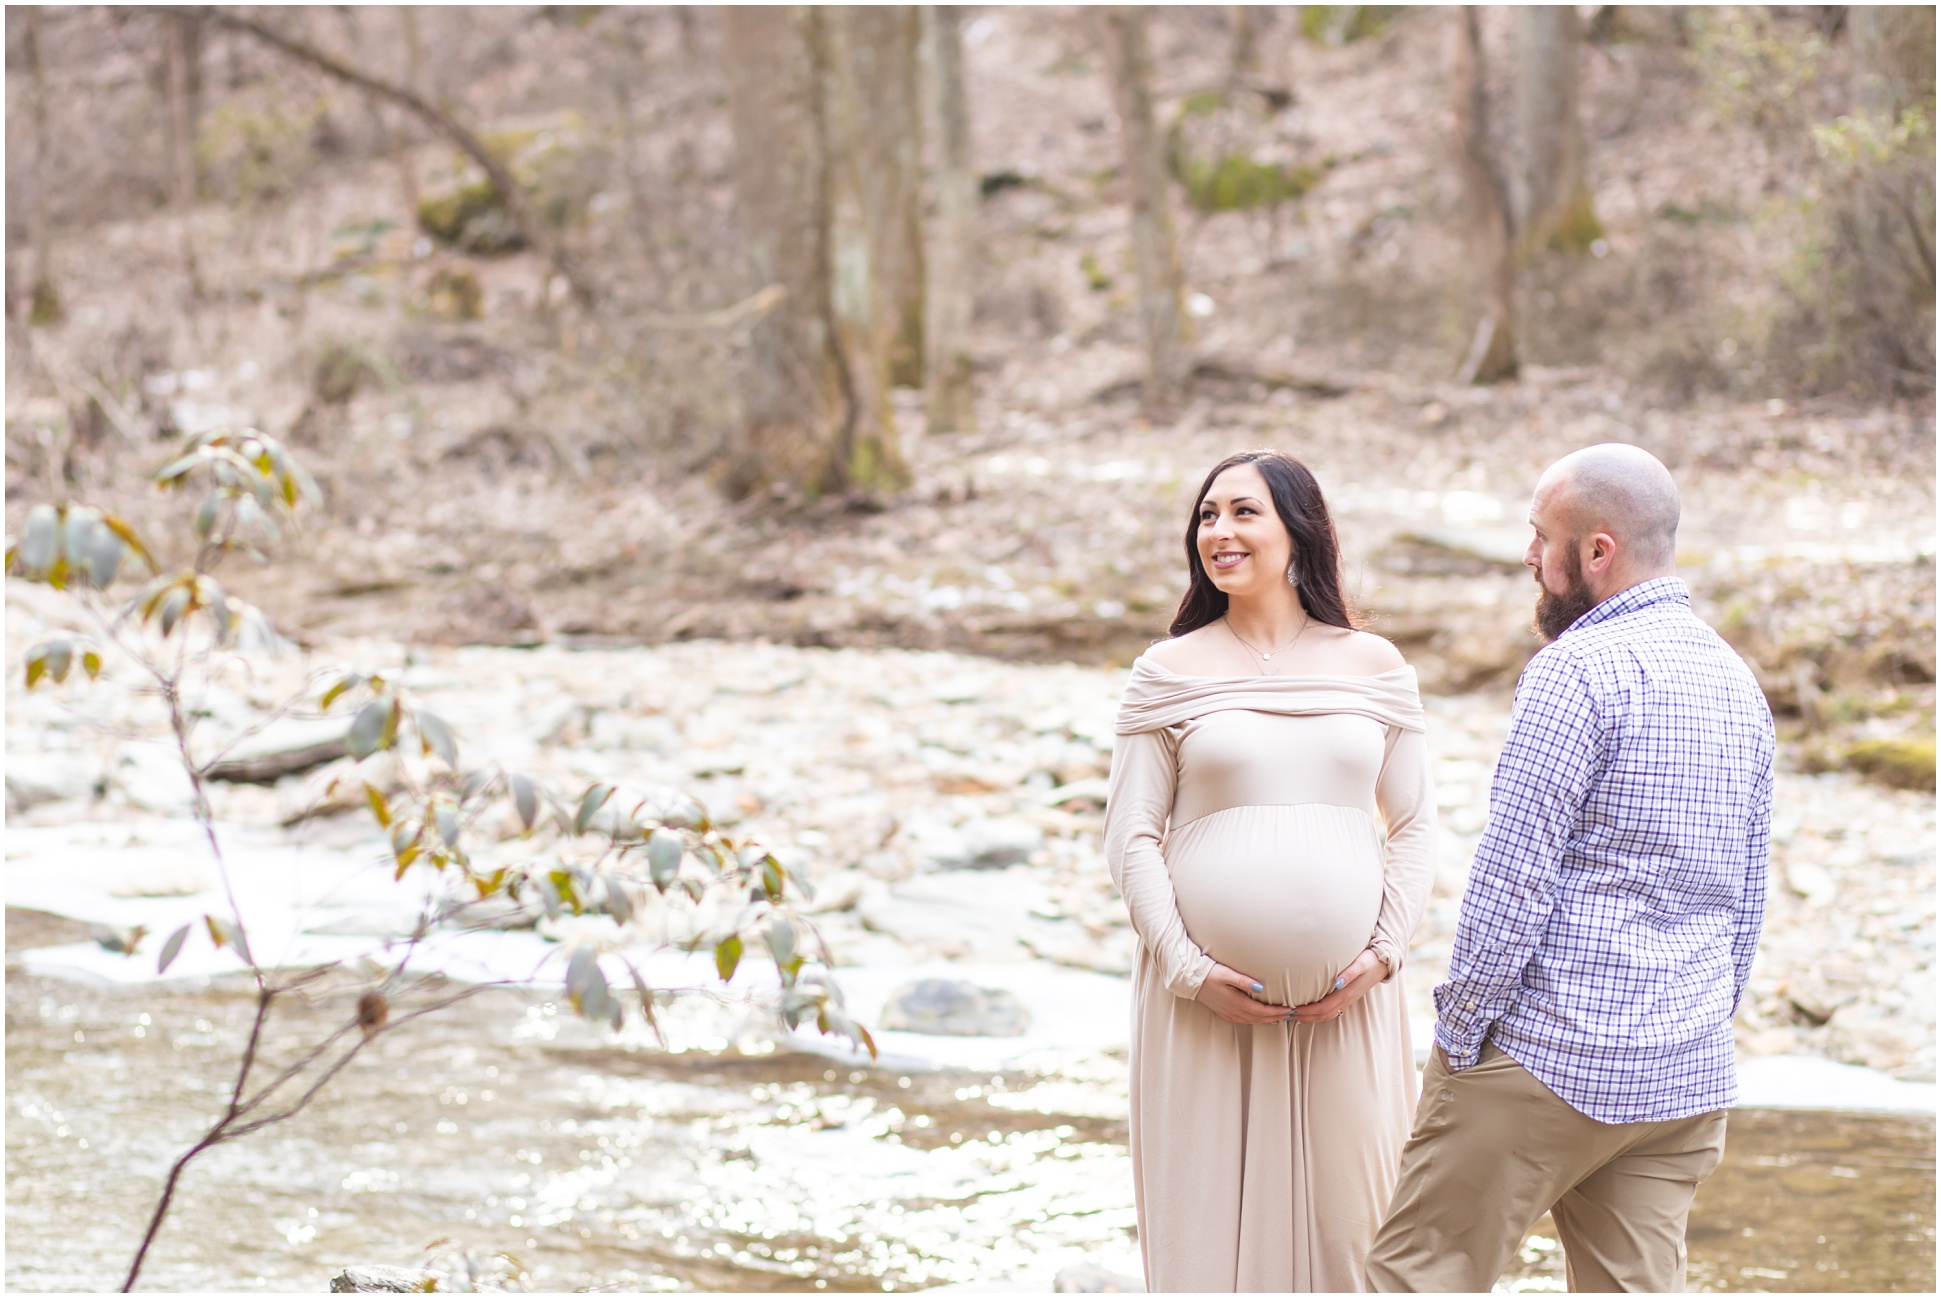 Pregnant Mom looking over into the falls as her husband adoringly glances over at her